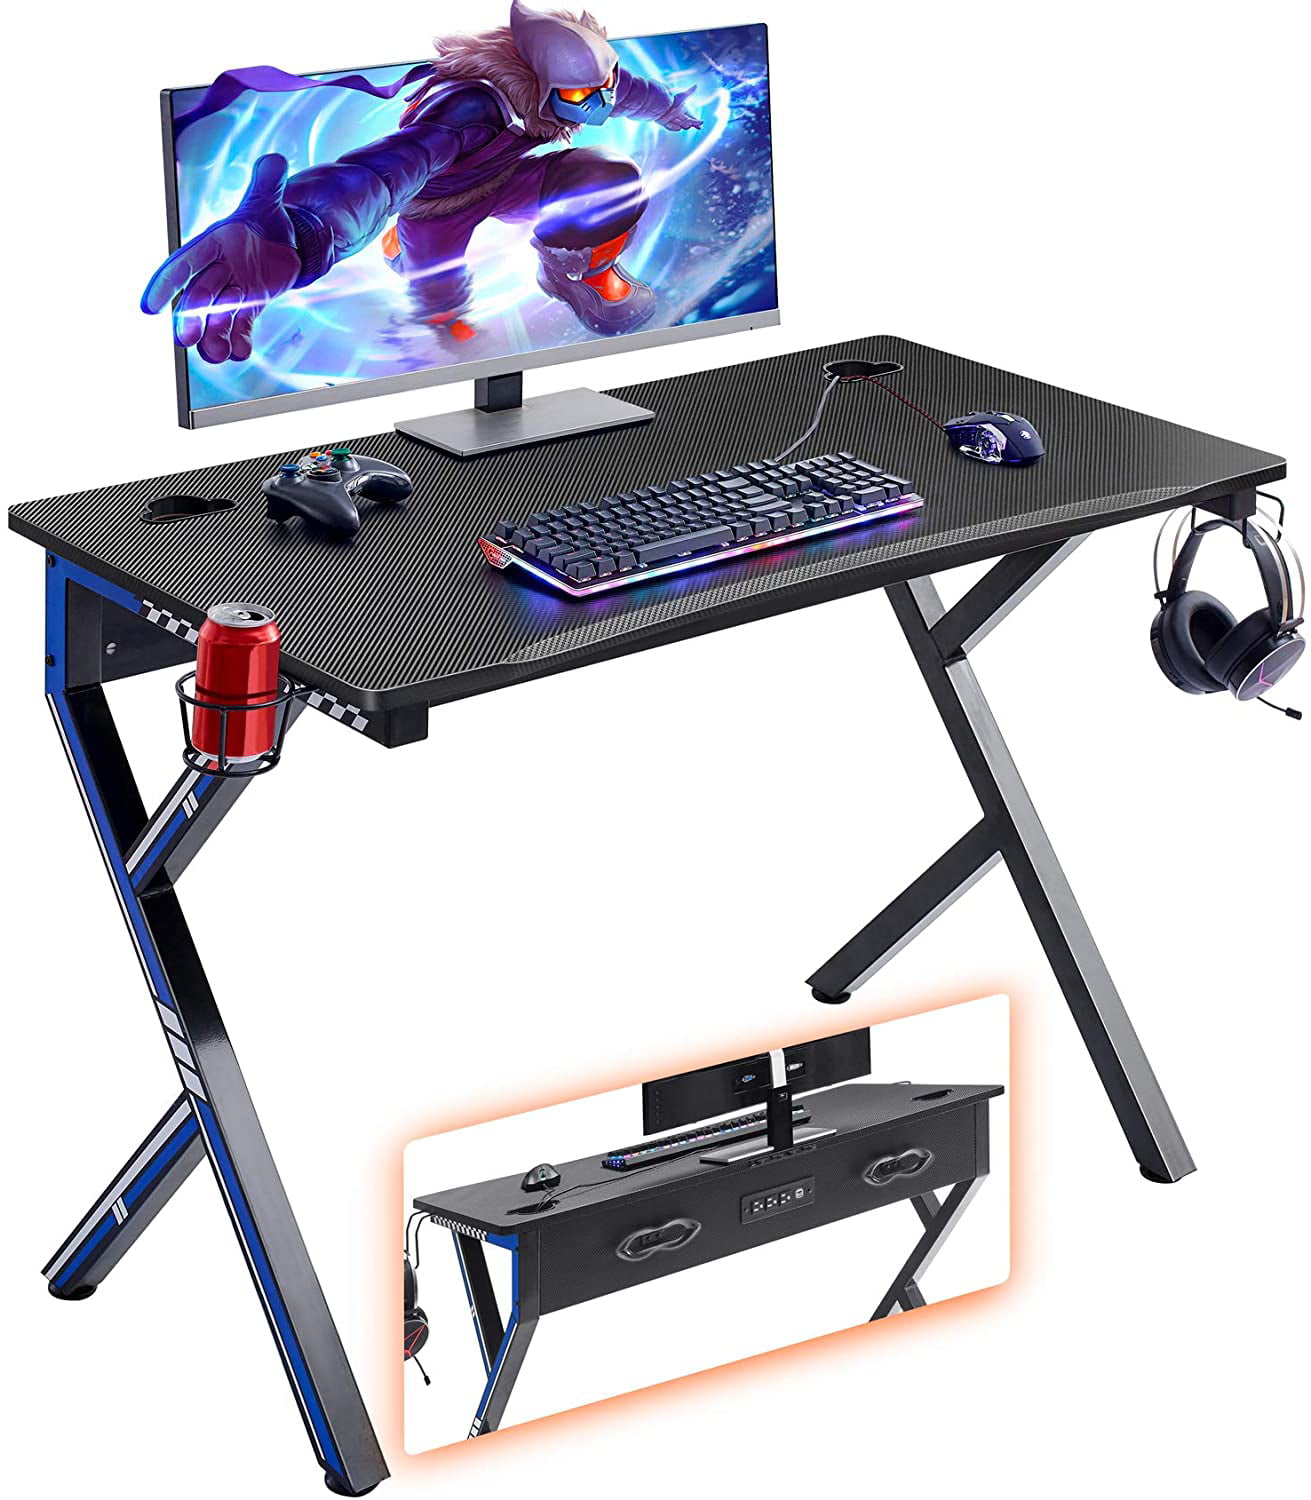 Headphone Hook PC Gaming Workstation Built-in 3-Outlet Socket & 2 USB Ports Home Office Computer Desk ZENY Gaming Desk with Carbon Fiber Surface 45.2 W x 23.6 D x 30.4’’H Cup Holder